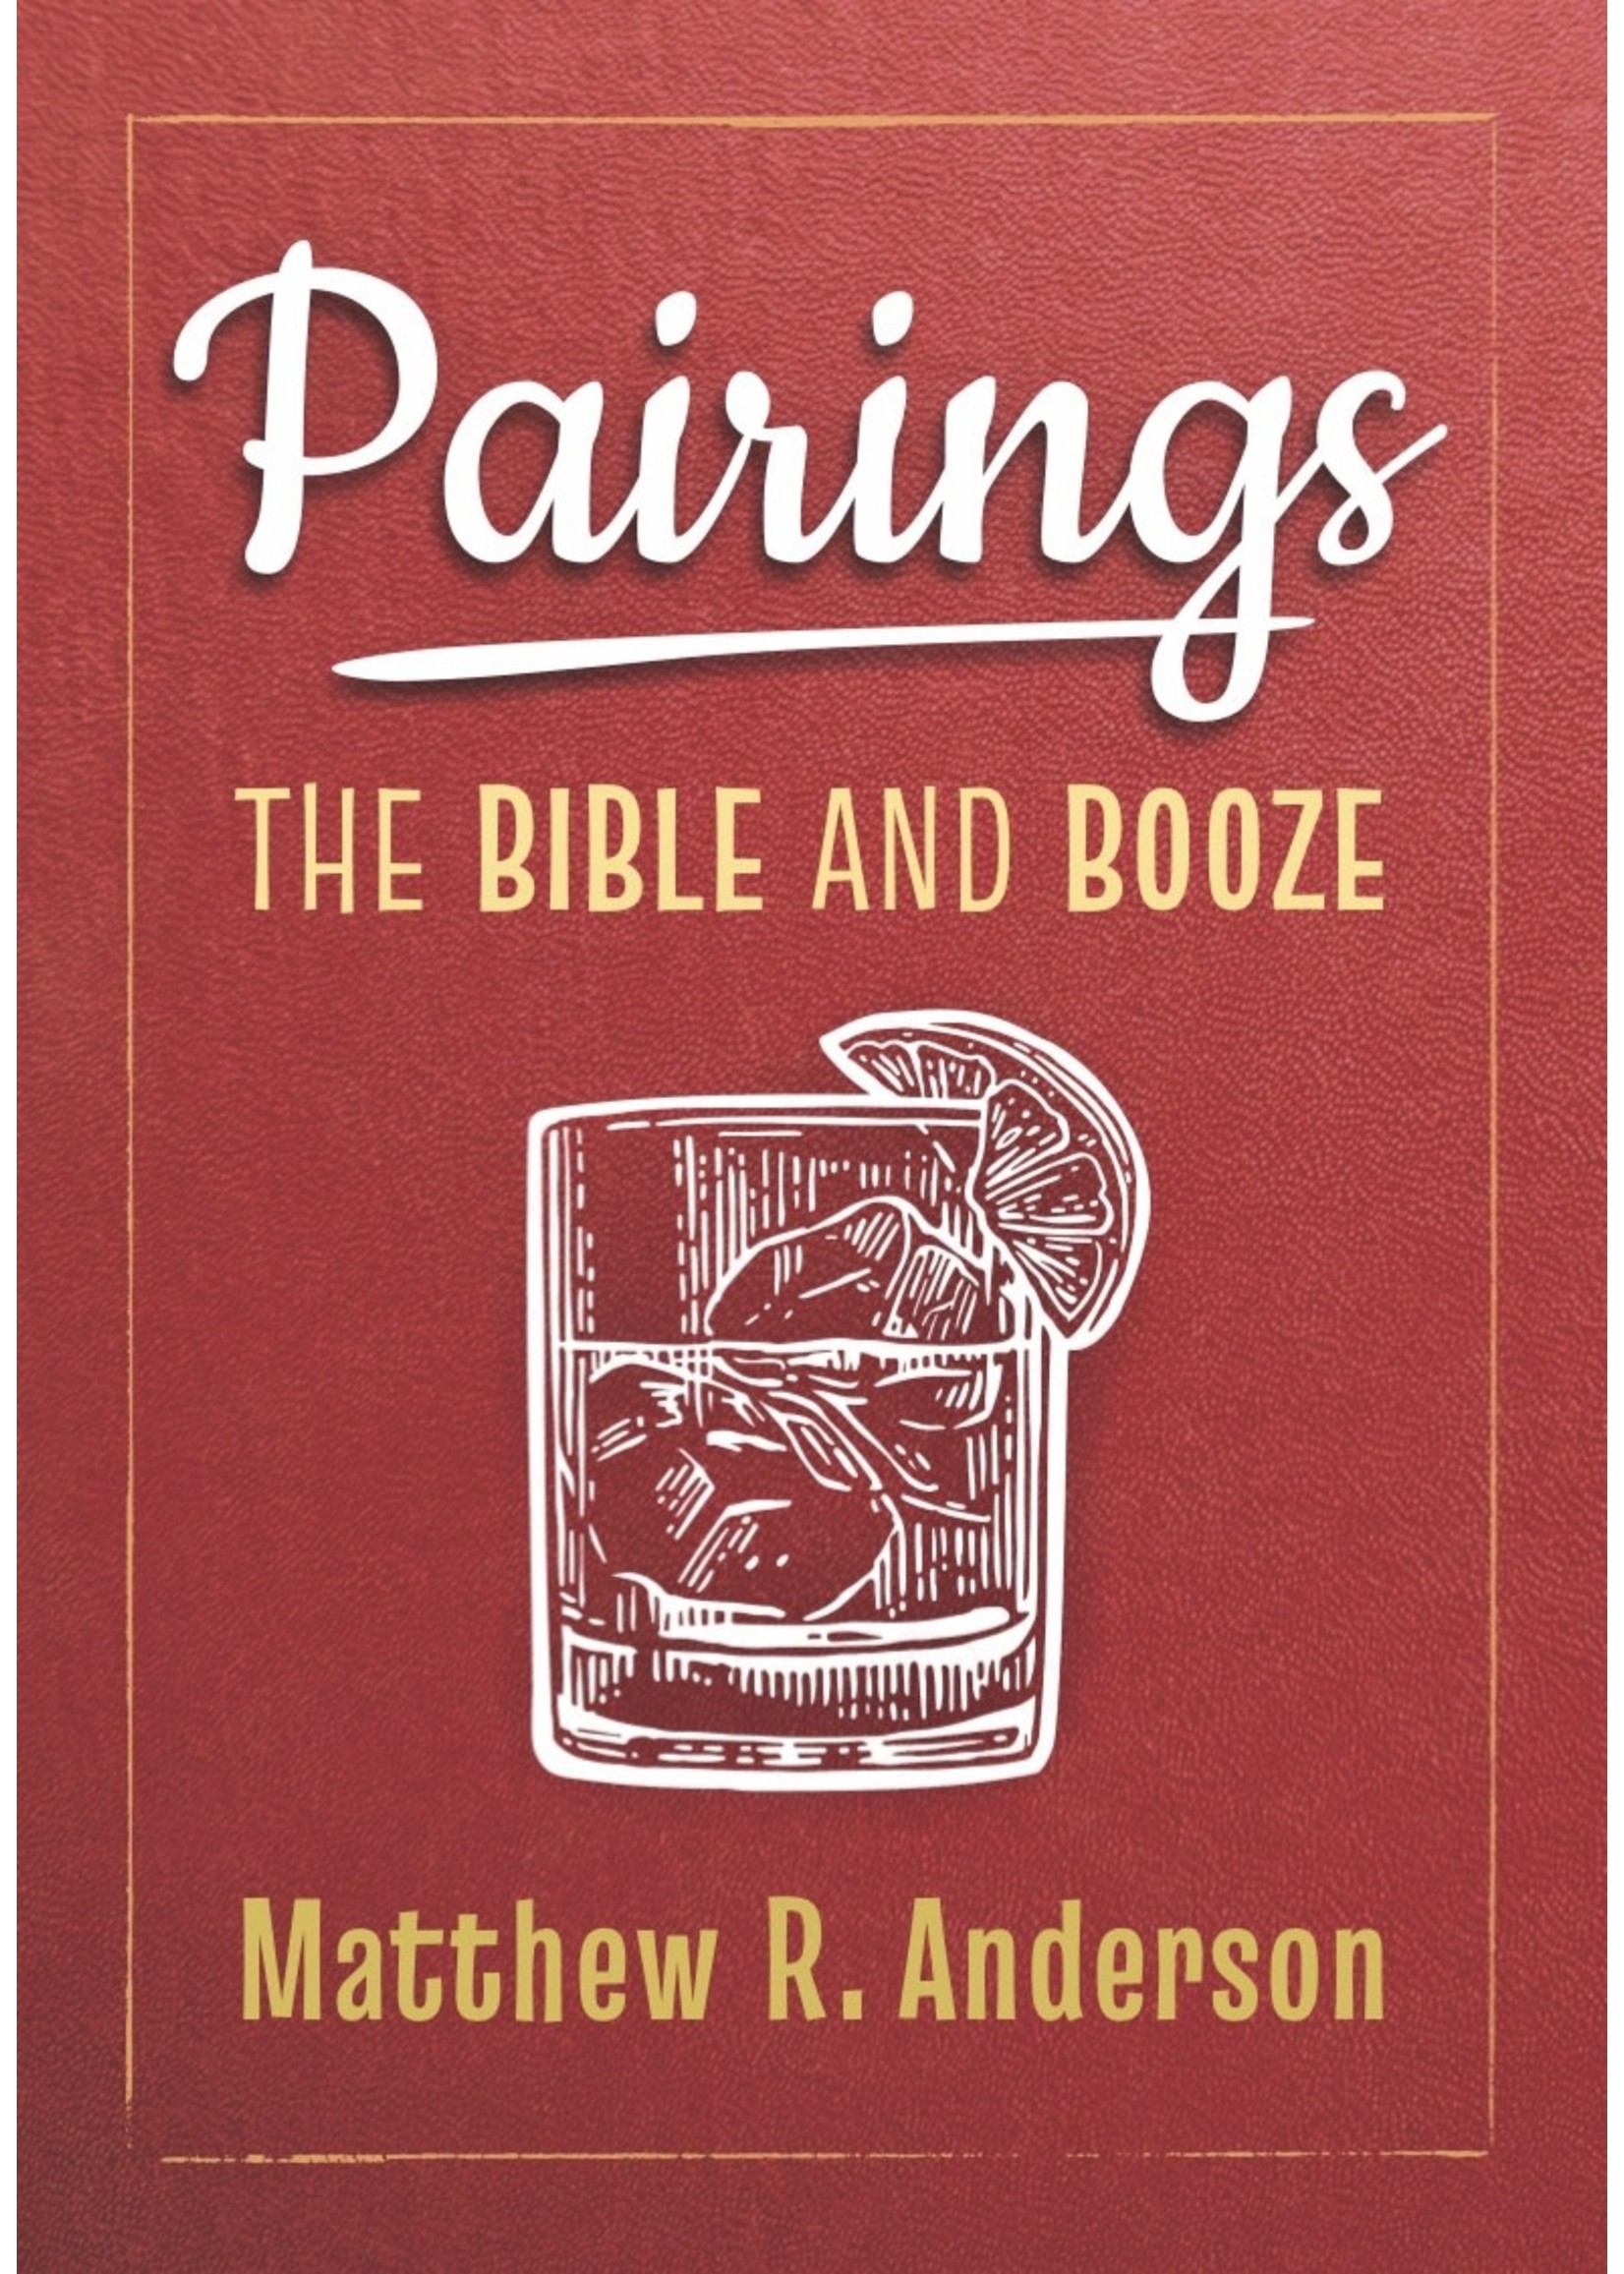 Pairings: The Bible and Booze by Matthew R. Anderson